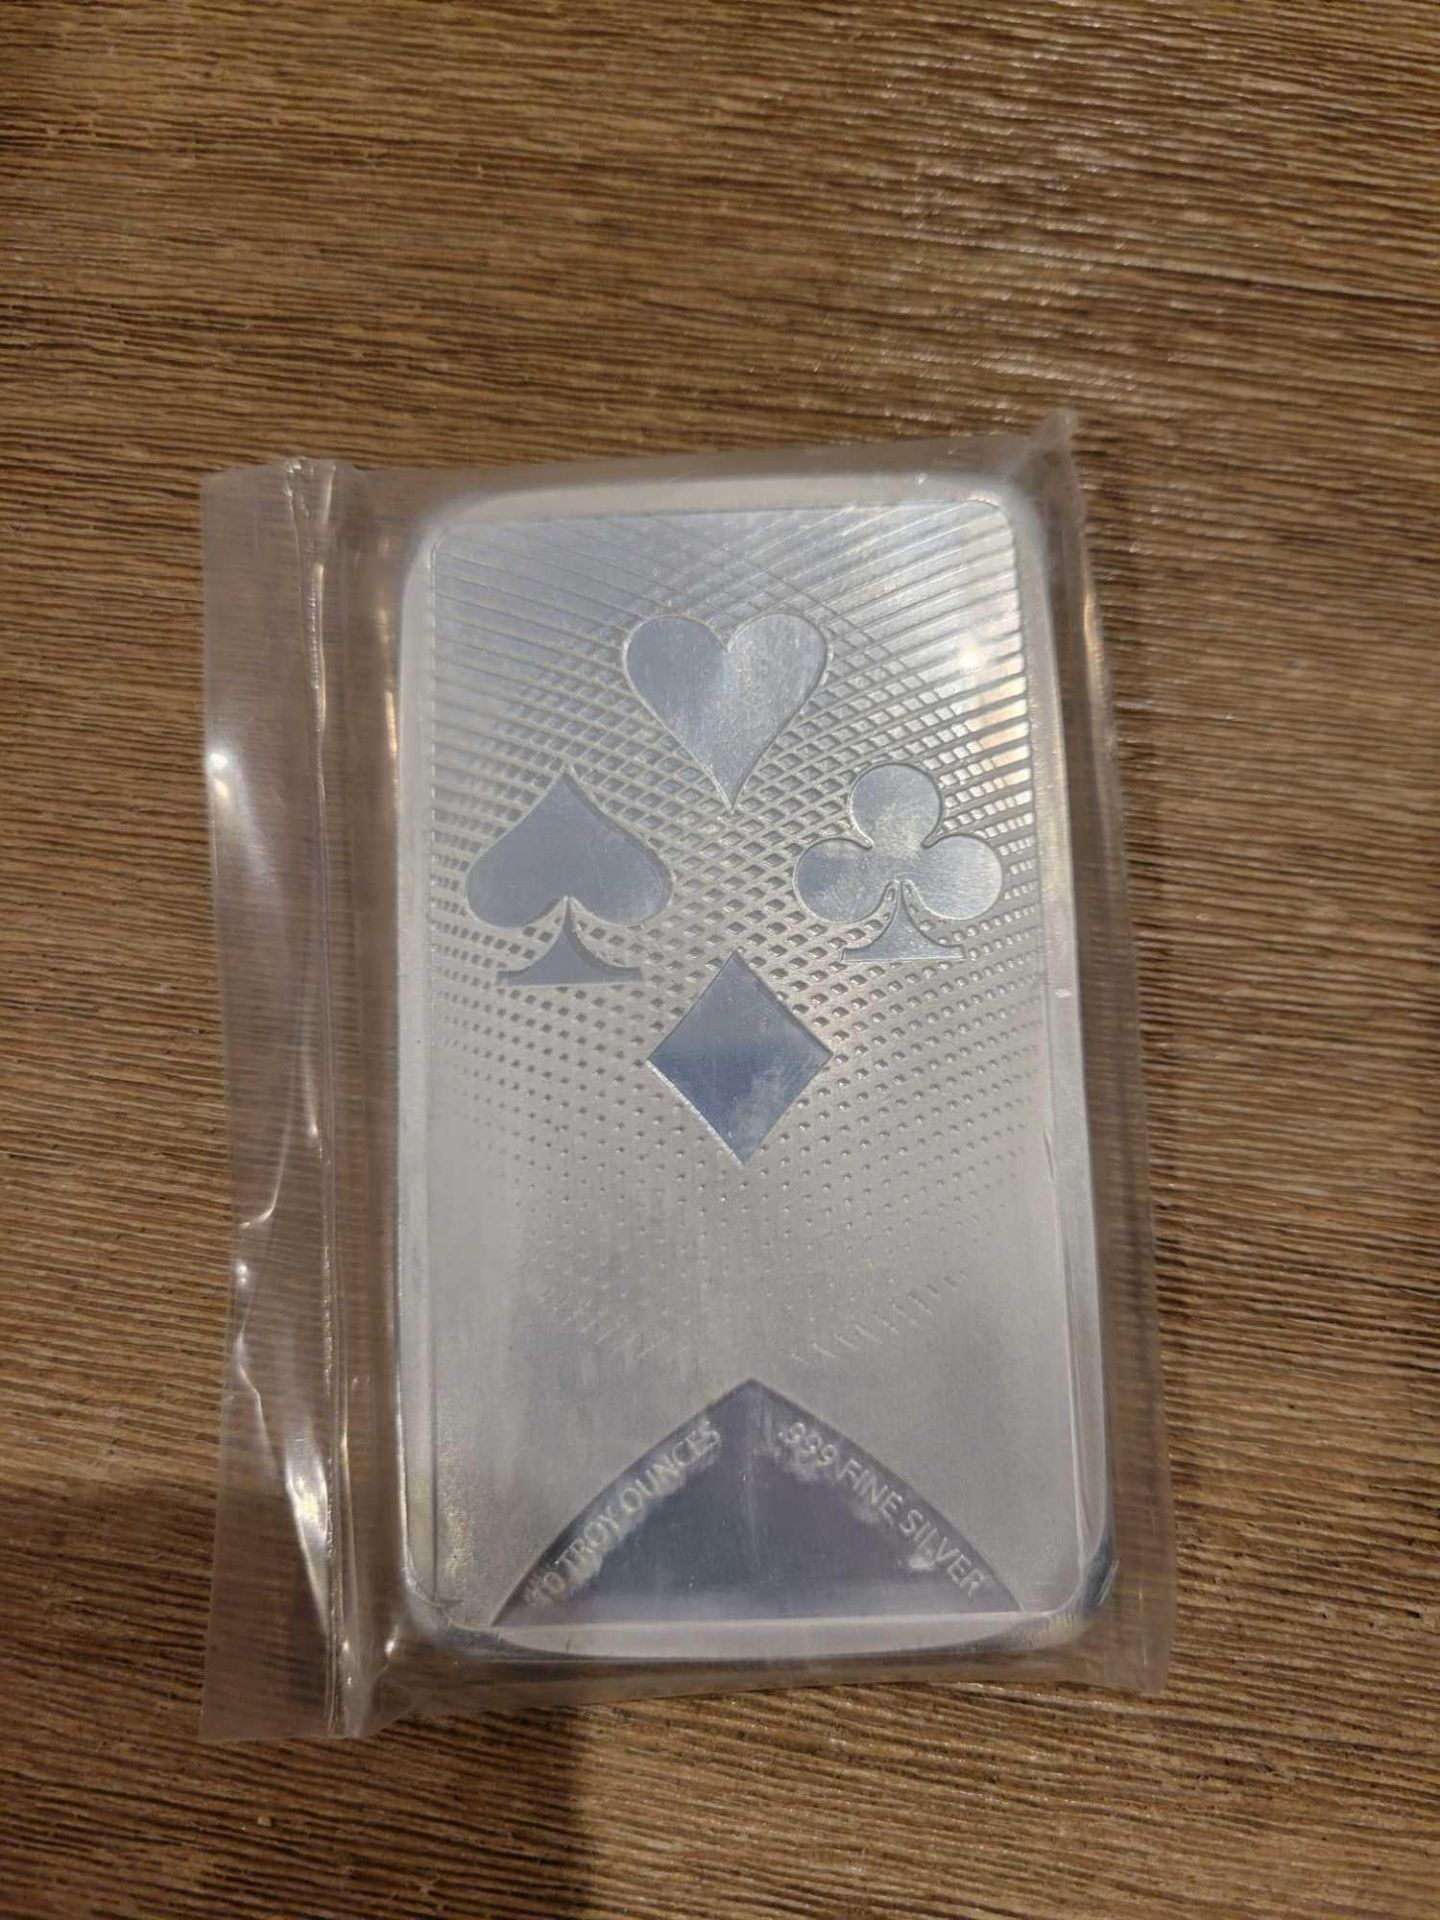 10 oz Ace of Spades Silver - Image 2 of 4